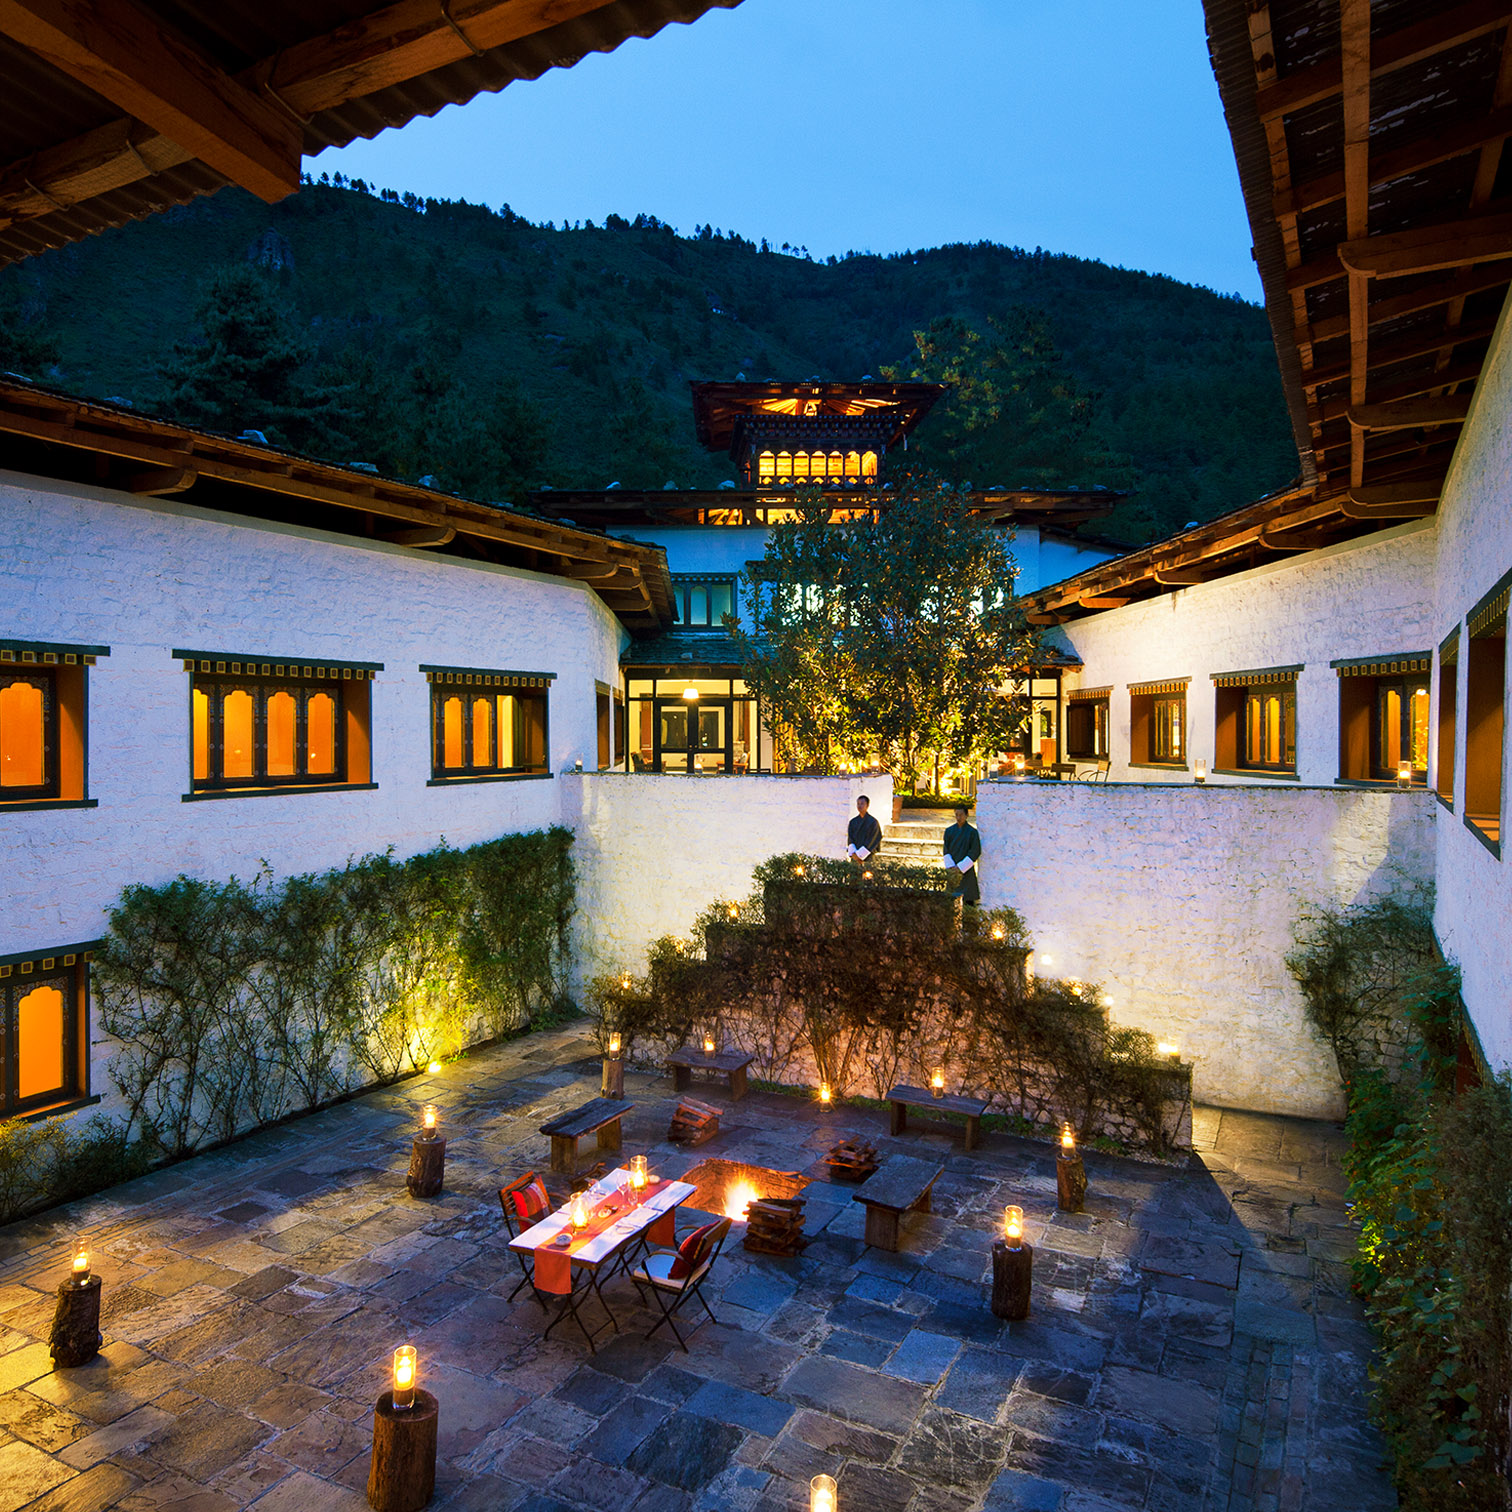 A Courtyard With A Building And A Mountain In The Background